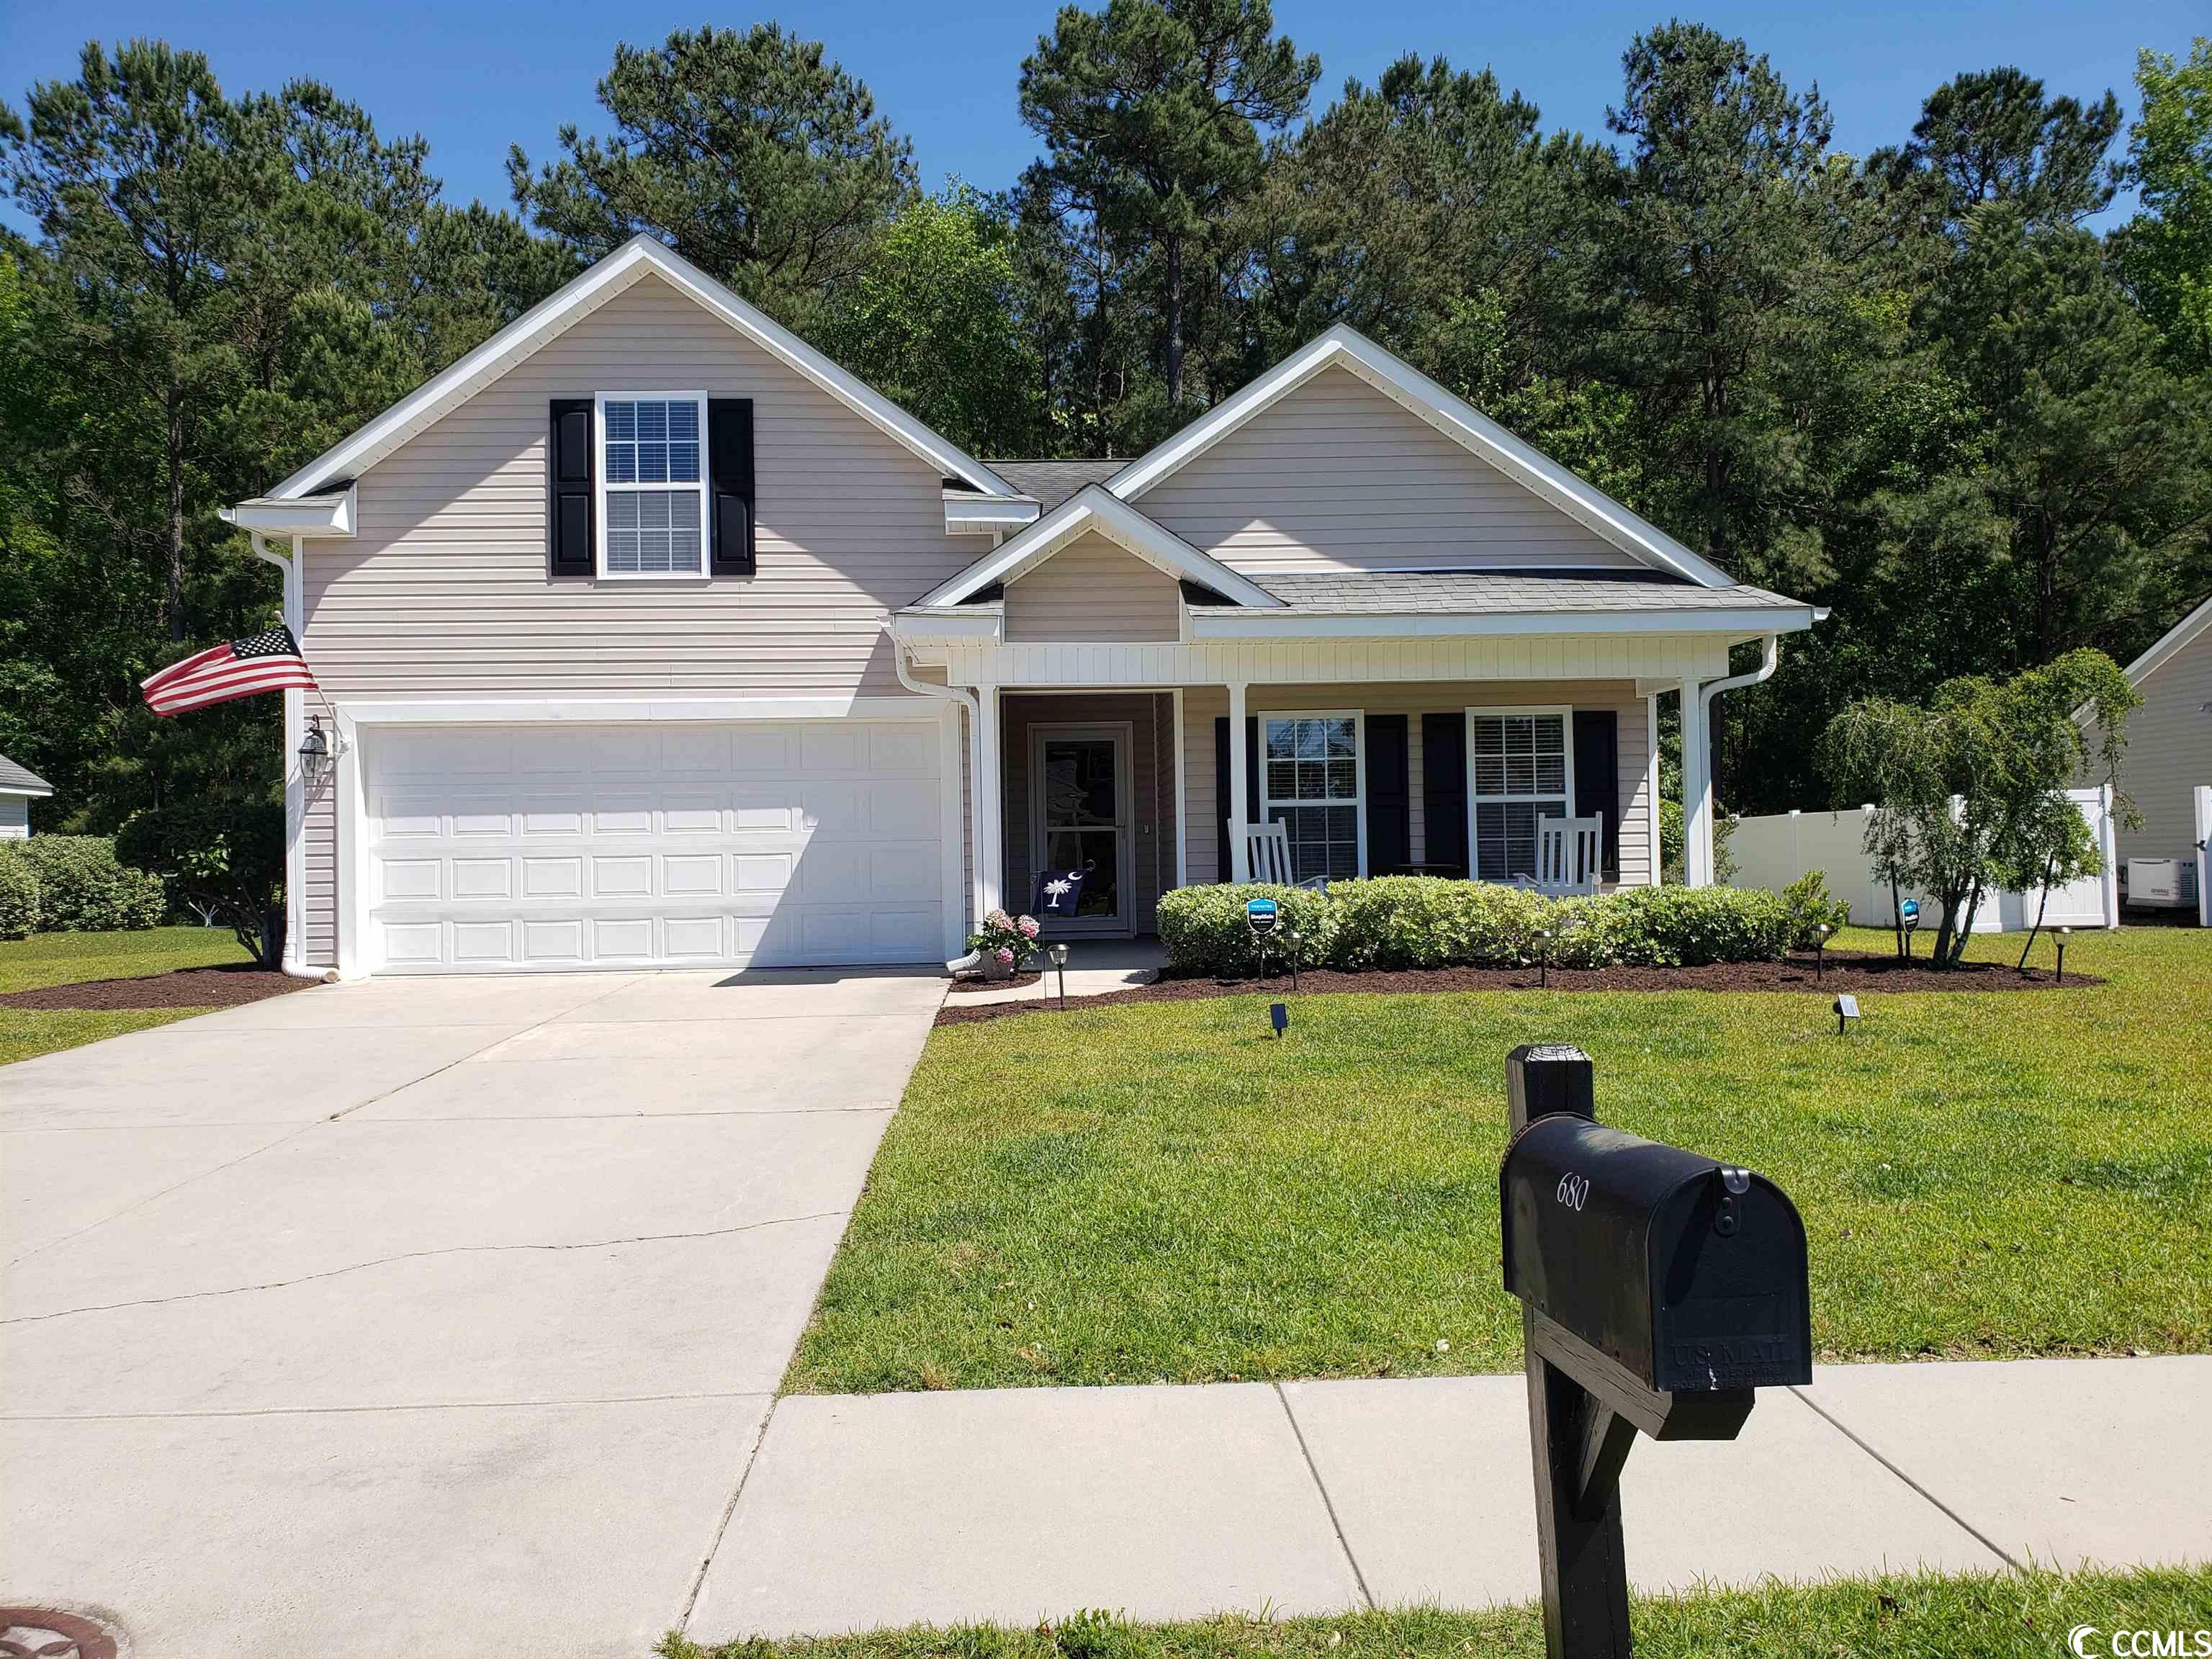 open house sat. april 20th 10 to 6; sun. april 21st 1 to 6. move-in ready home on .23-acre lot backing to woods. to main street in north myrtle beach is 7 minutes; 8 min. to the ocean; 3 min. to la belle amie winery; 4 min. to north myrtle beach park & sports complex. new luxury vinyl plank flooring installed 5-23. large 4th bedroom is upstairs. roomy front porch; 6.5' x 24' screened back porch. large master bedroom w/tray ceiling. master bathroom has double sinks, garden tub, shower & big walk-in closet. corian countertops in kitchen. vaulted ceiling & gas fireplace in living room; large dining area has wainscoting. new trane hvac system 2017. home inspected 1-27-24; repairs made. three minutes to rt. 31, 13 min. to the restaurants & gambling boats on the intracoastal waterway at the little river waterfront, 13 min. to barefoot landing, 22 min. to broadway at the beach, 15 min. to calabash, nc, 30 min. to myrtle beach airport, 70 min. to wilmington, nc, airport. no community pool use.